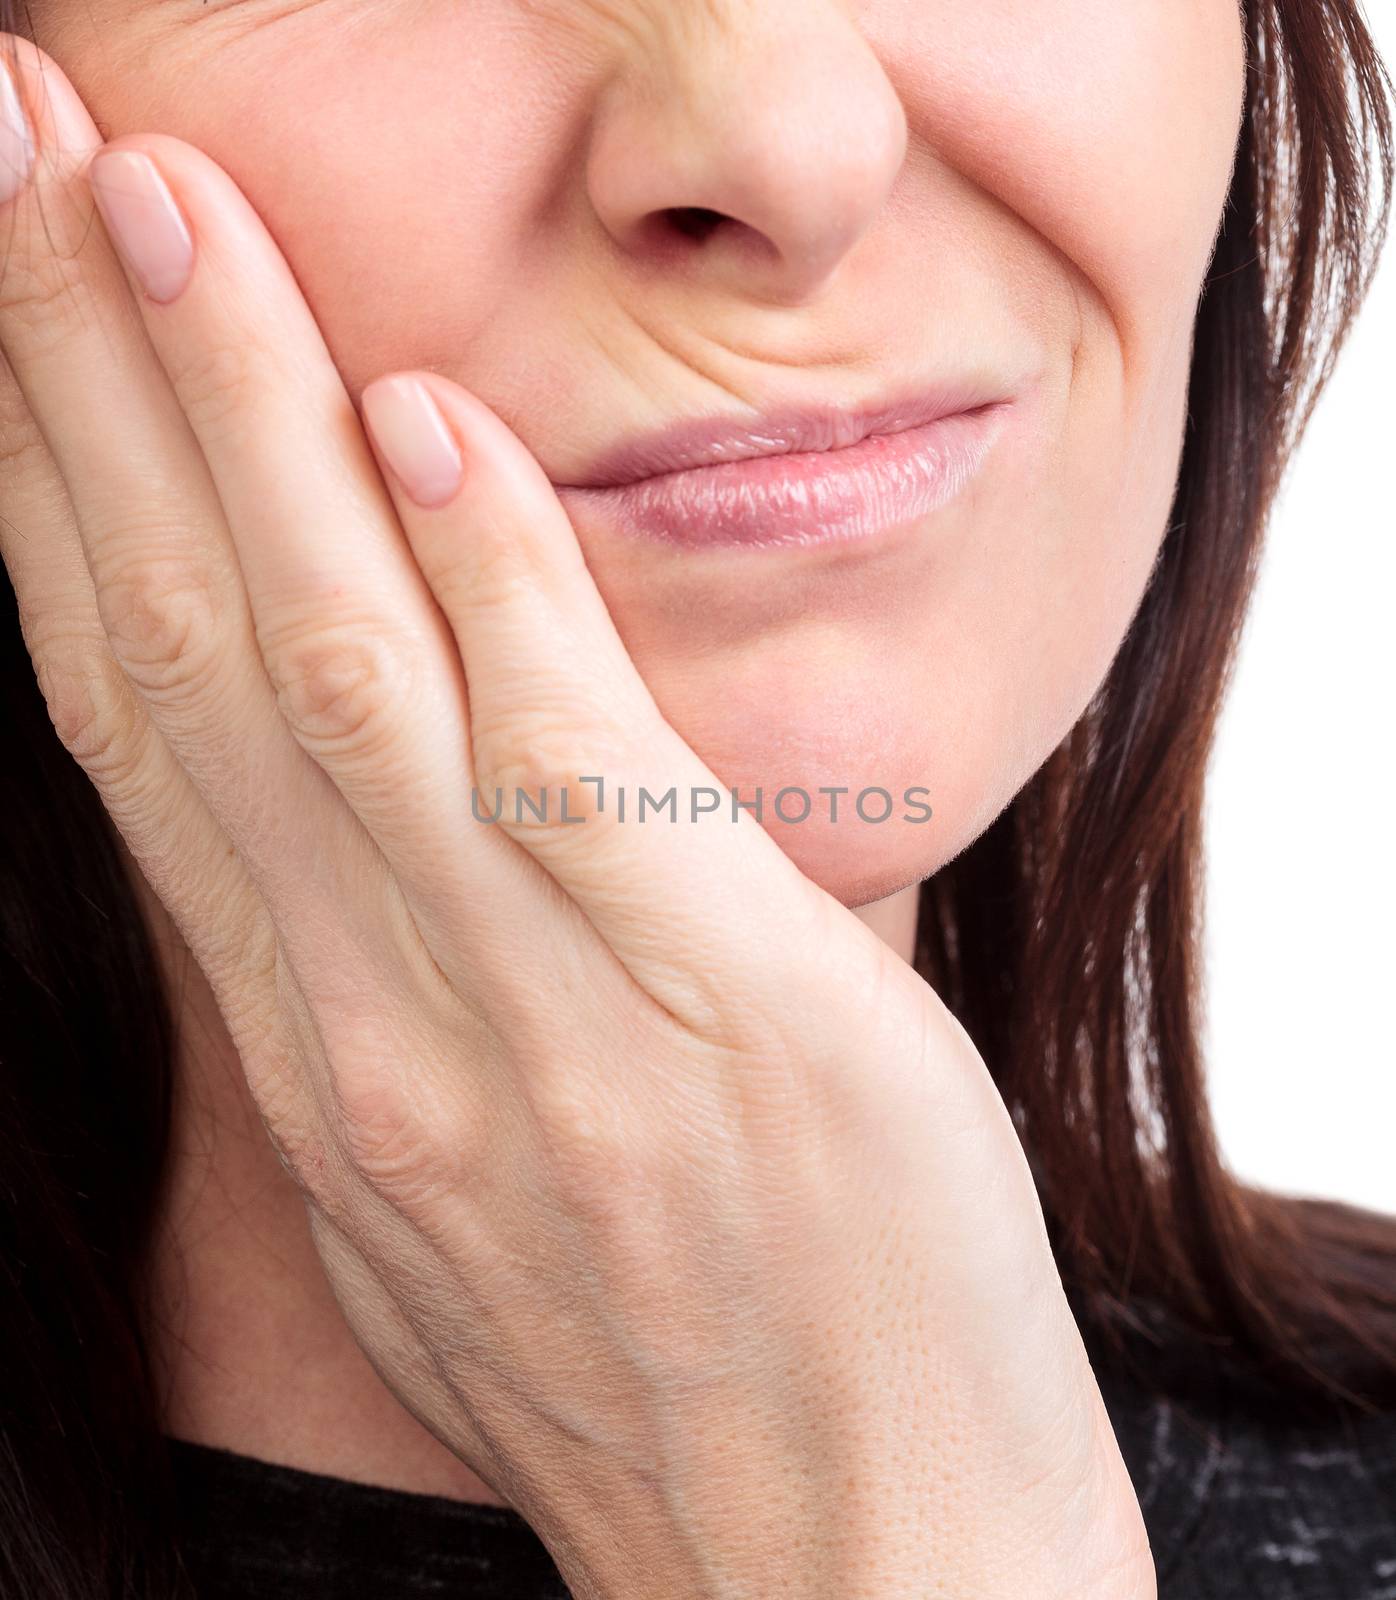 Woman with a toothpain